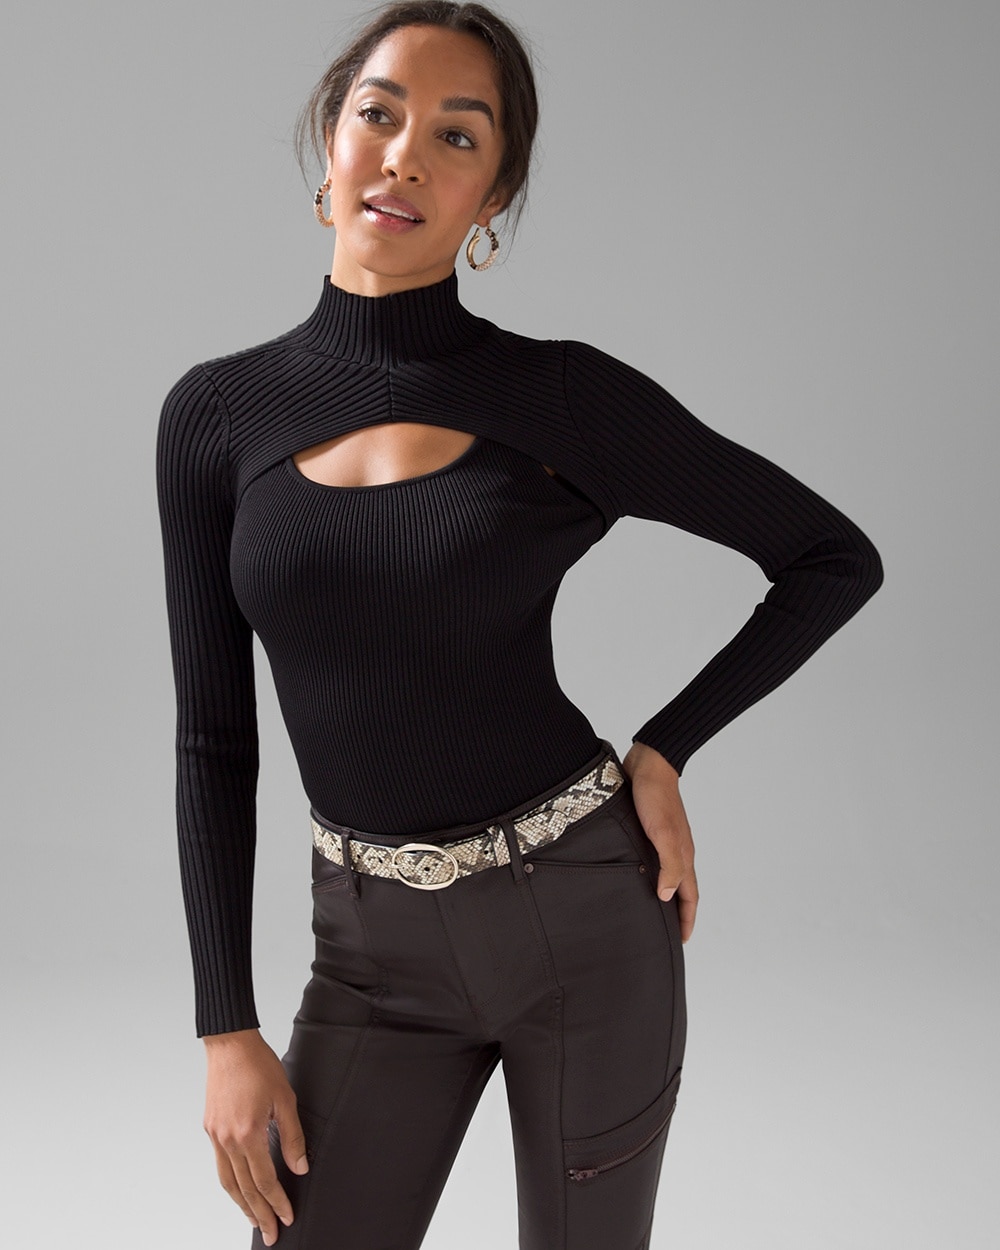 Long Sleeve Cutout Turtleneck Sweater video preview image, click to start video